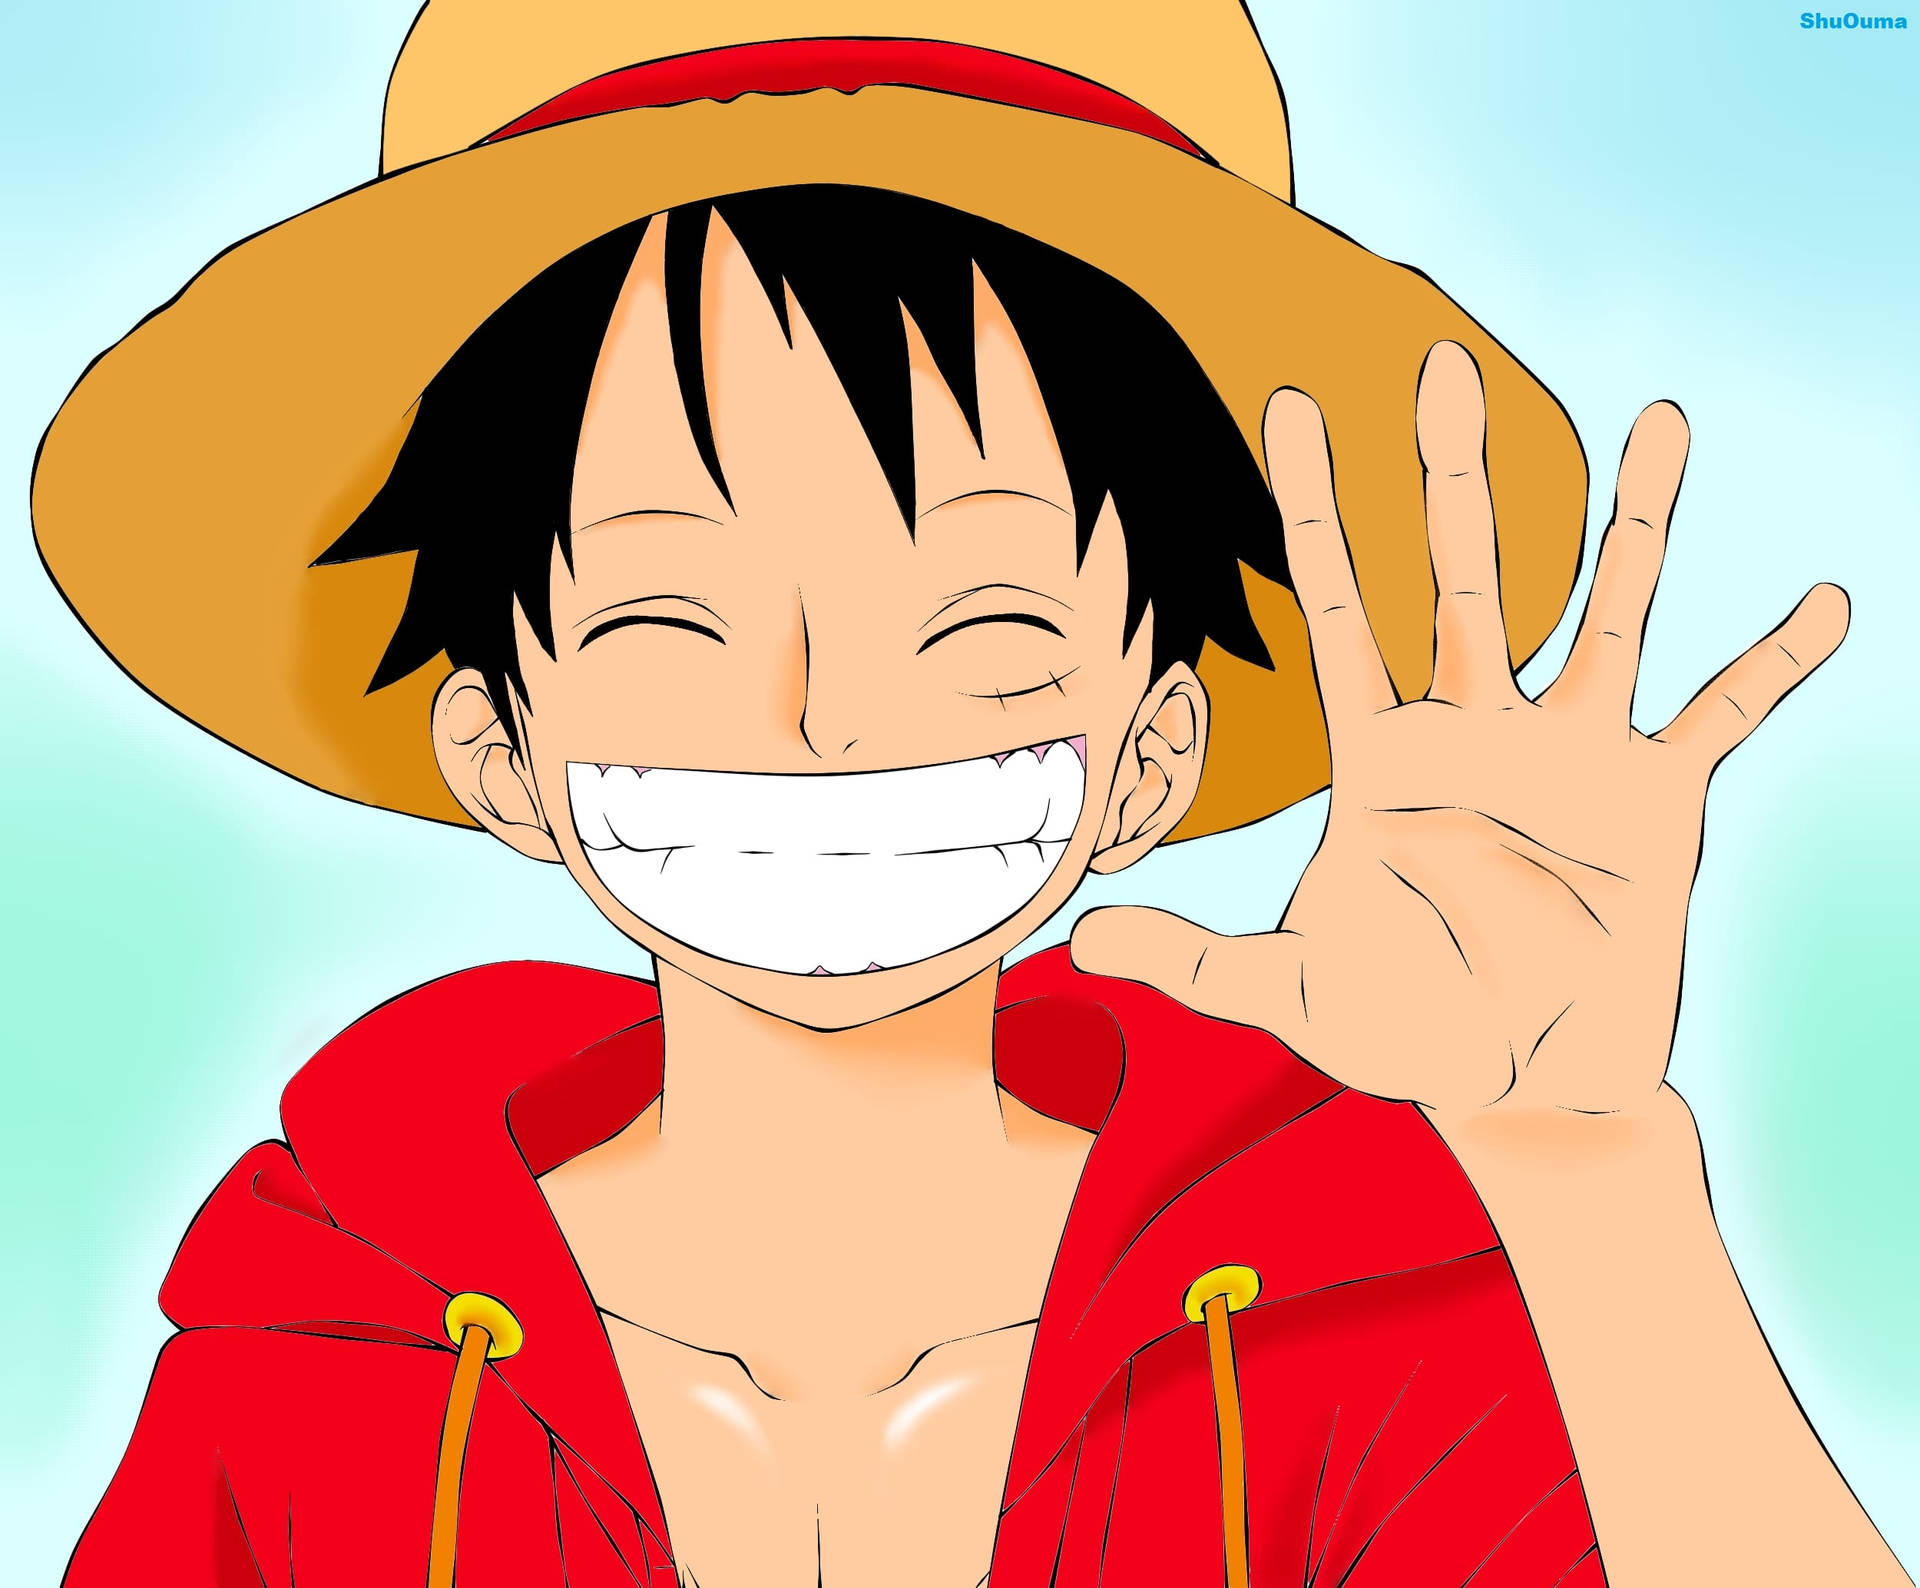 Luffy Smile While Waving Hand